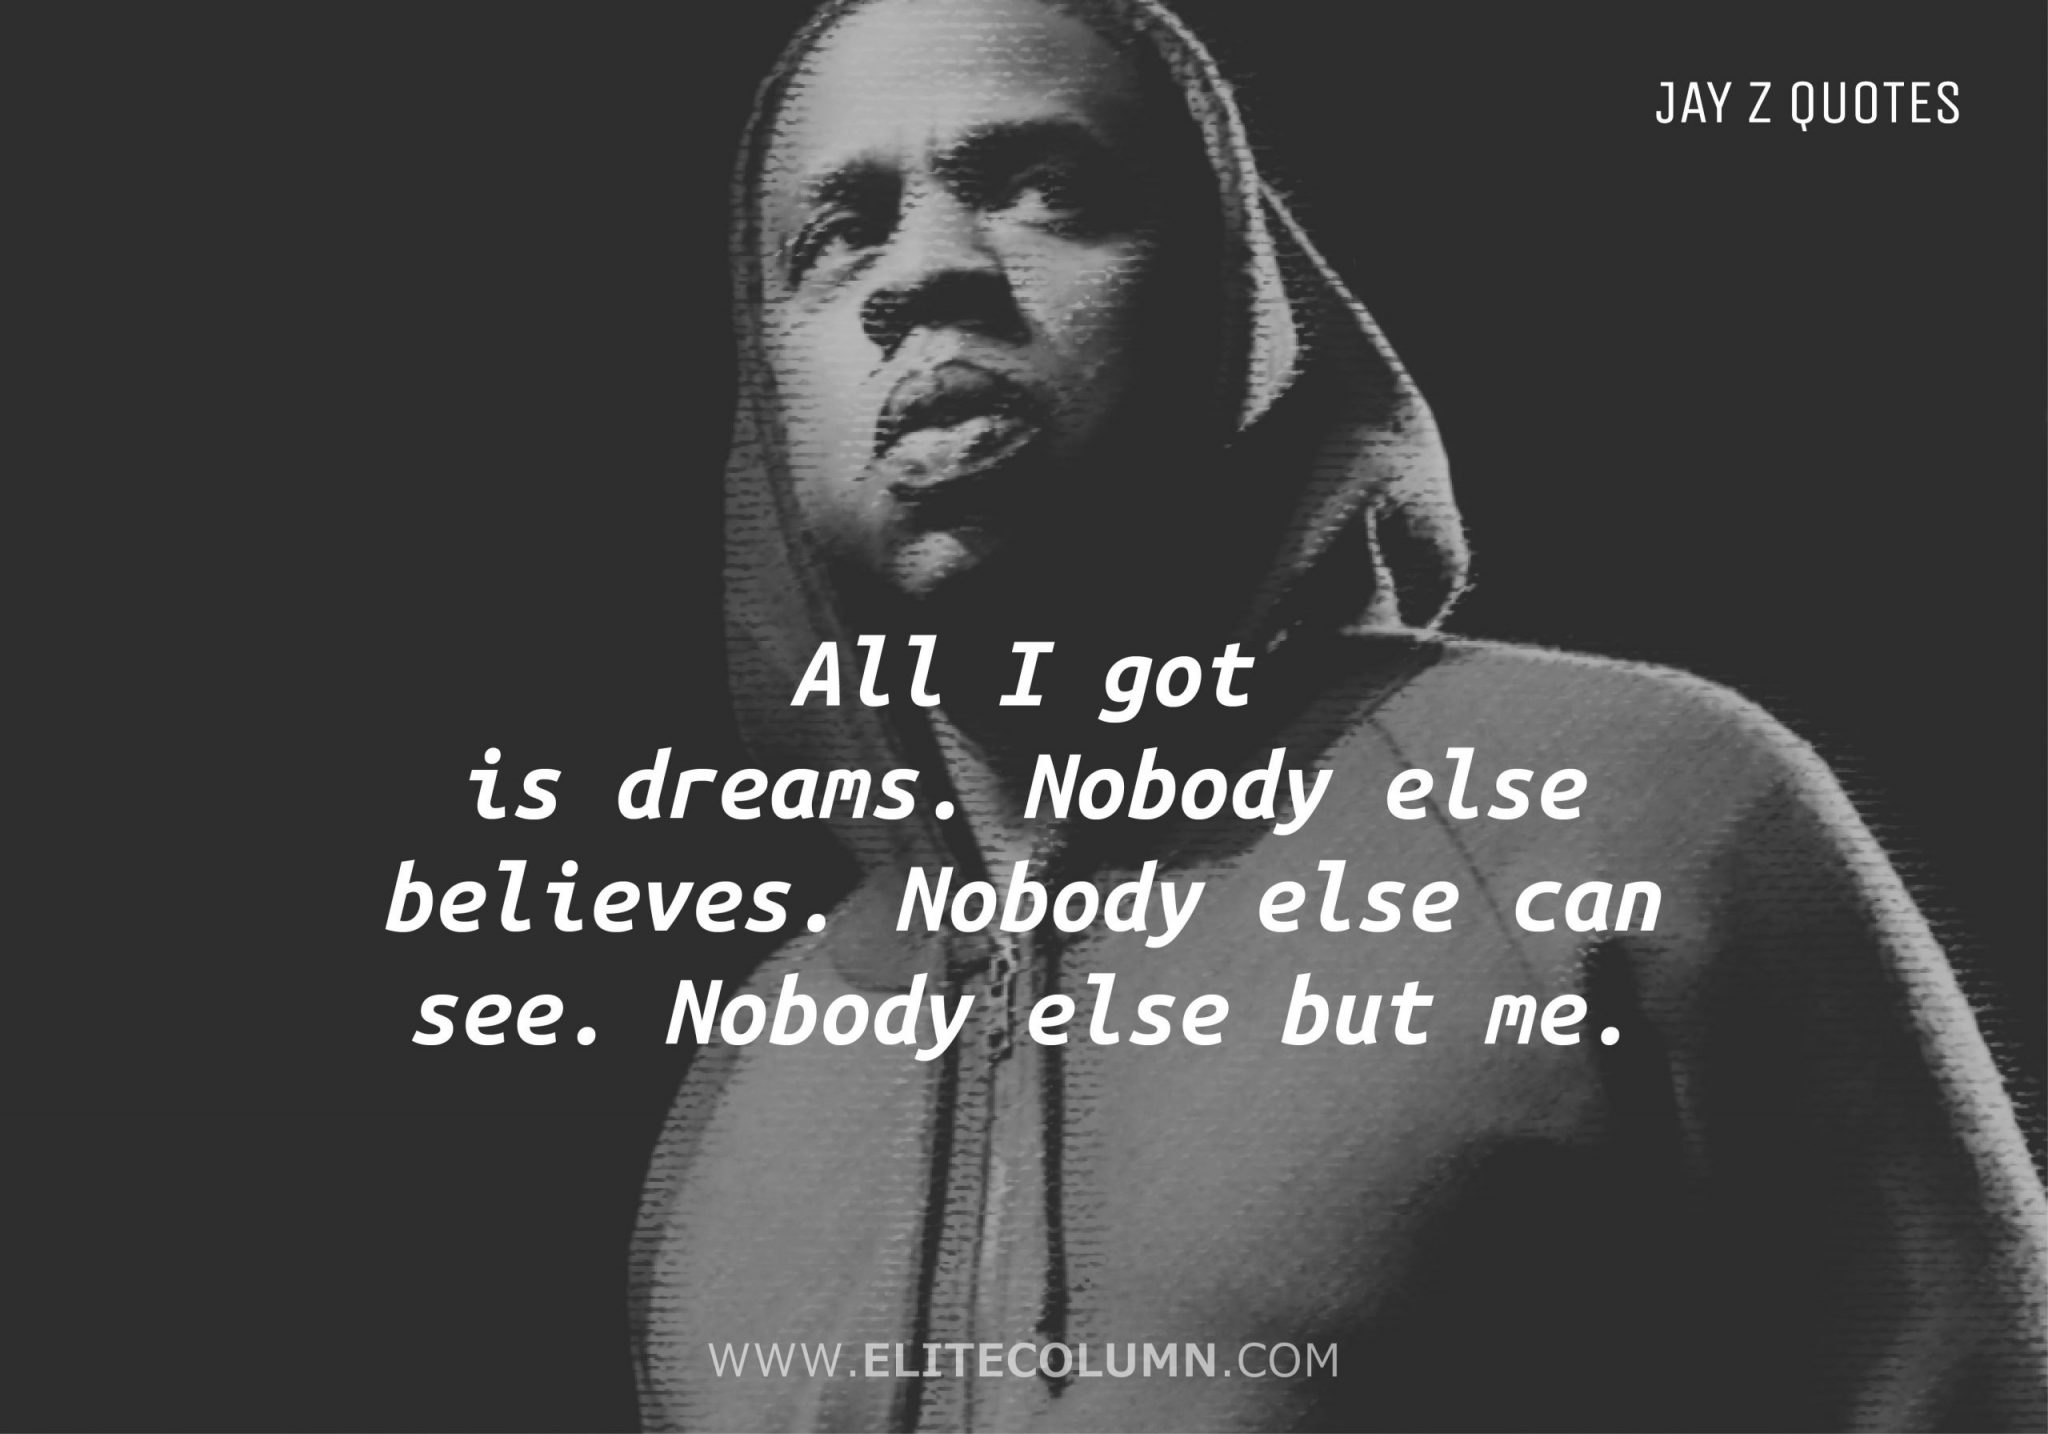 jay z on to the next one quote